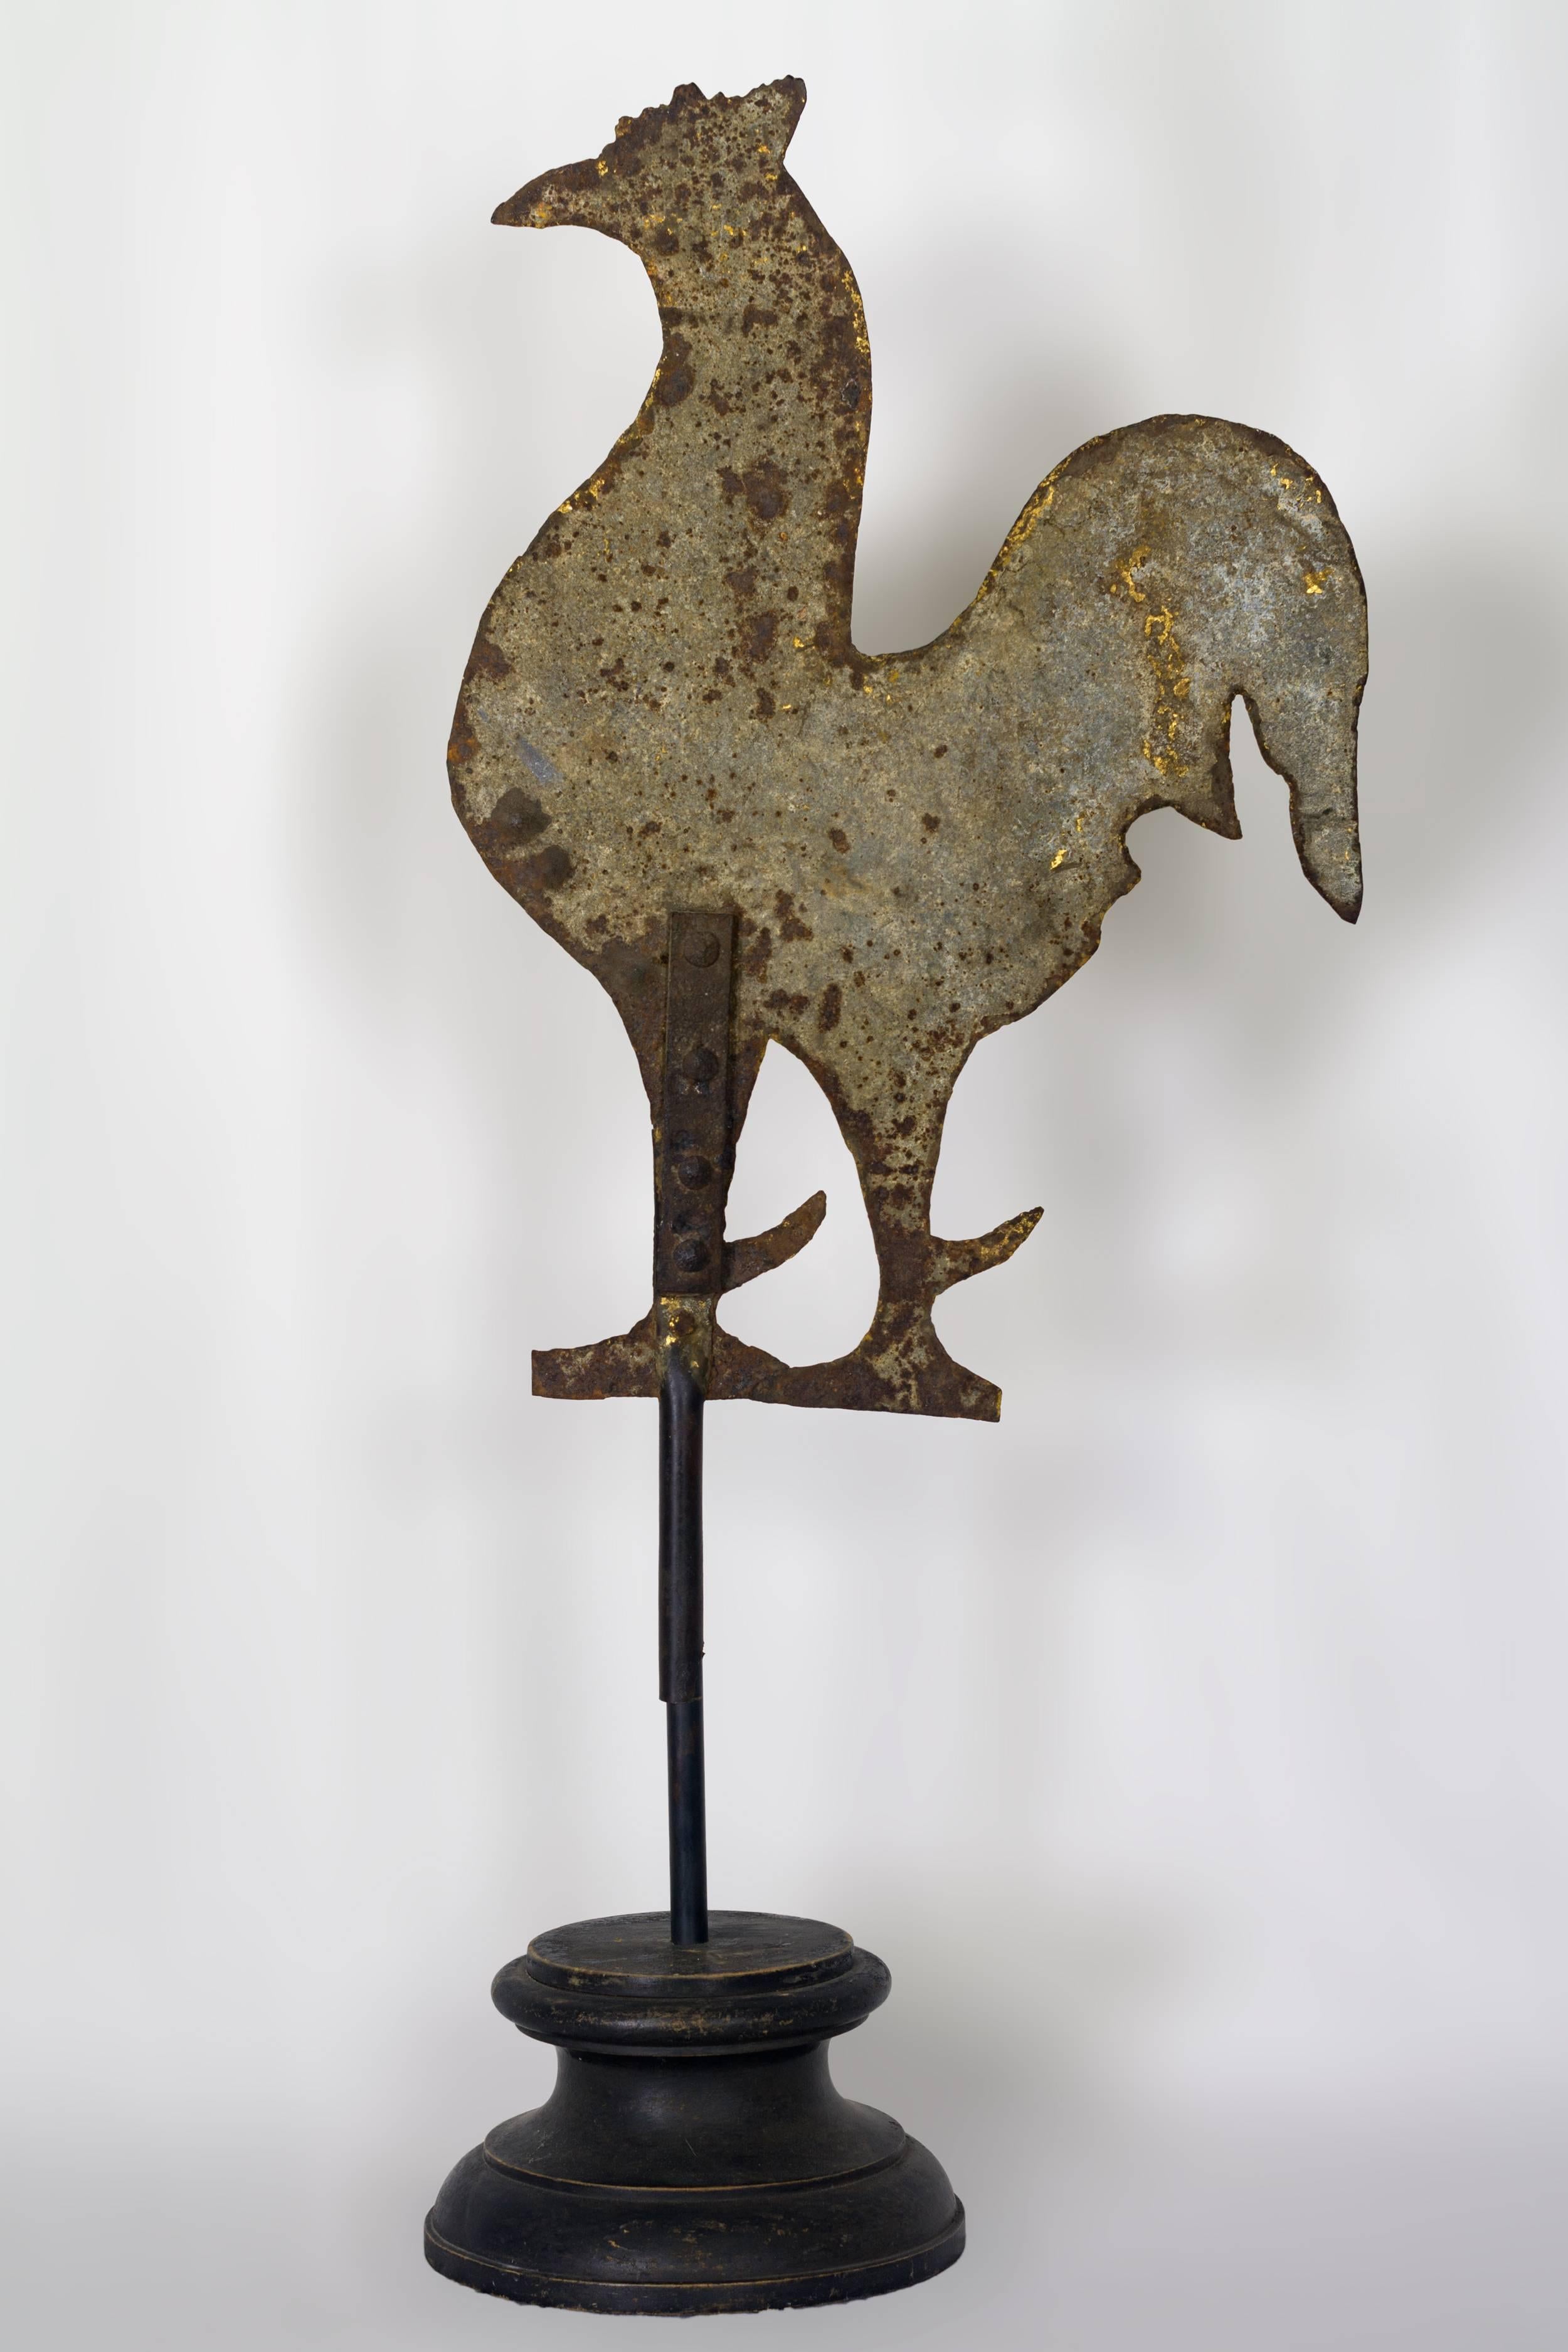 Handmade sheet iron rooster weathervane in silhouette form with exaggerated spurs in a weathered gilt finish. Mounted on a turned wooden base
American, circa 1890-1910
Measures: 21 ½” x 15”.
 
   